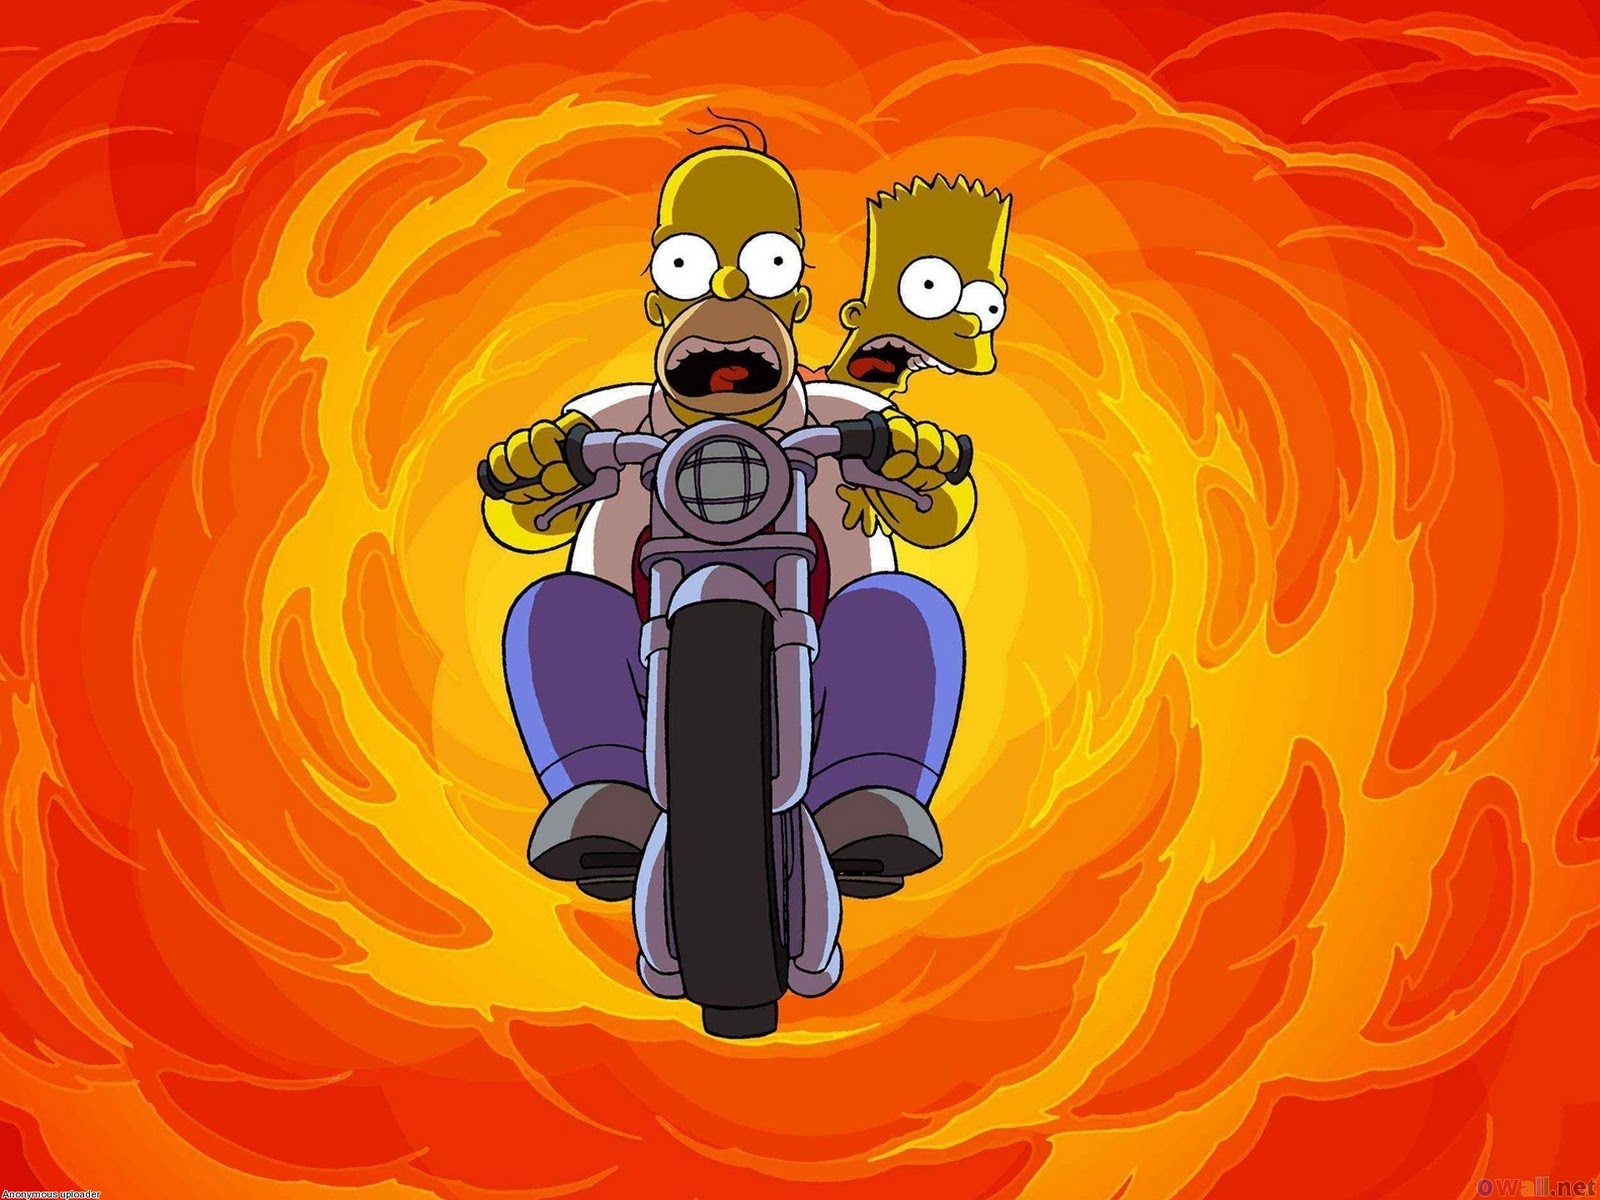 Simpsons Wallpaper The Bart And Homer Simpson